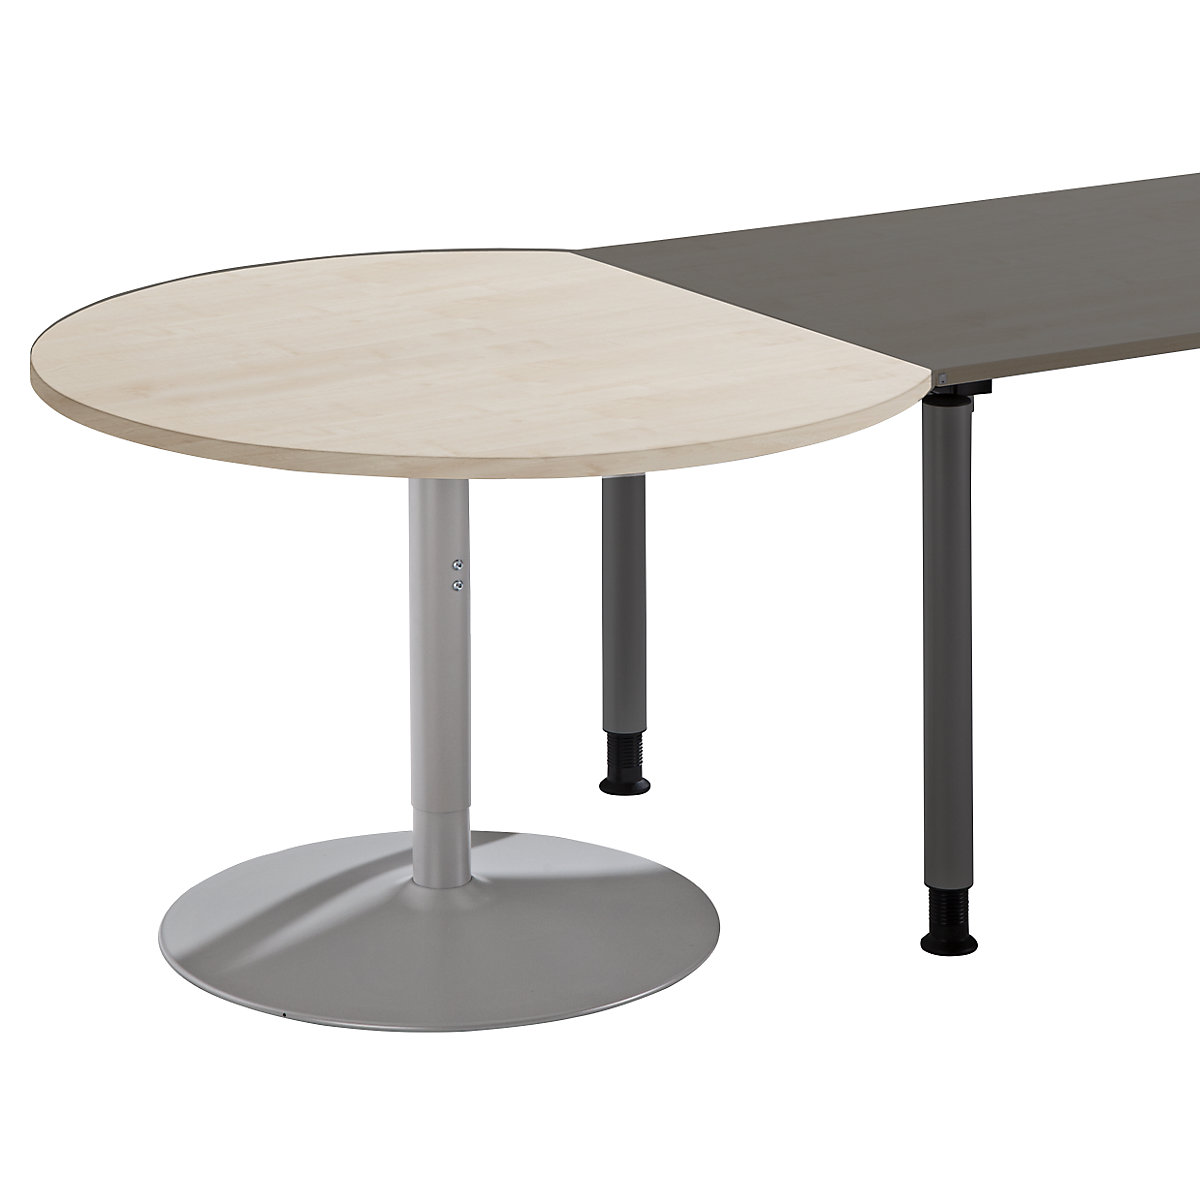 Add-on table THEA, with round base, maple finish-4